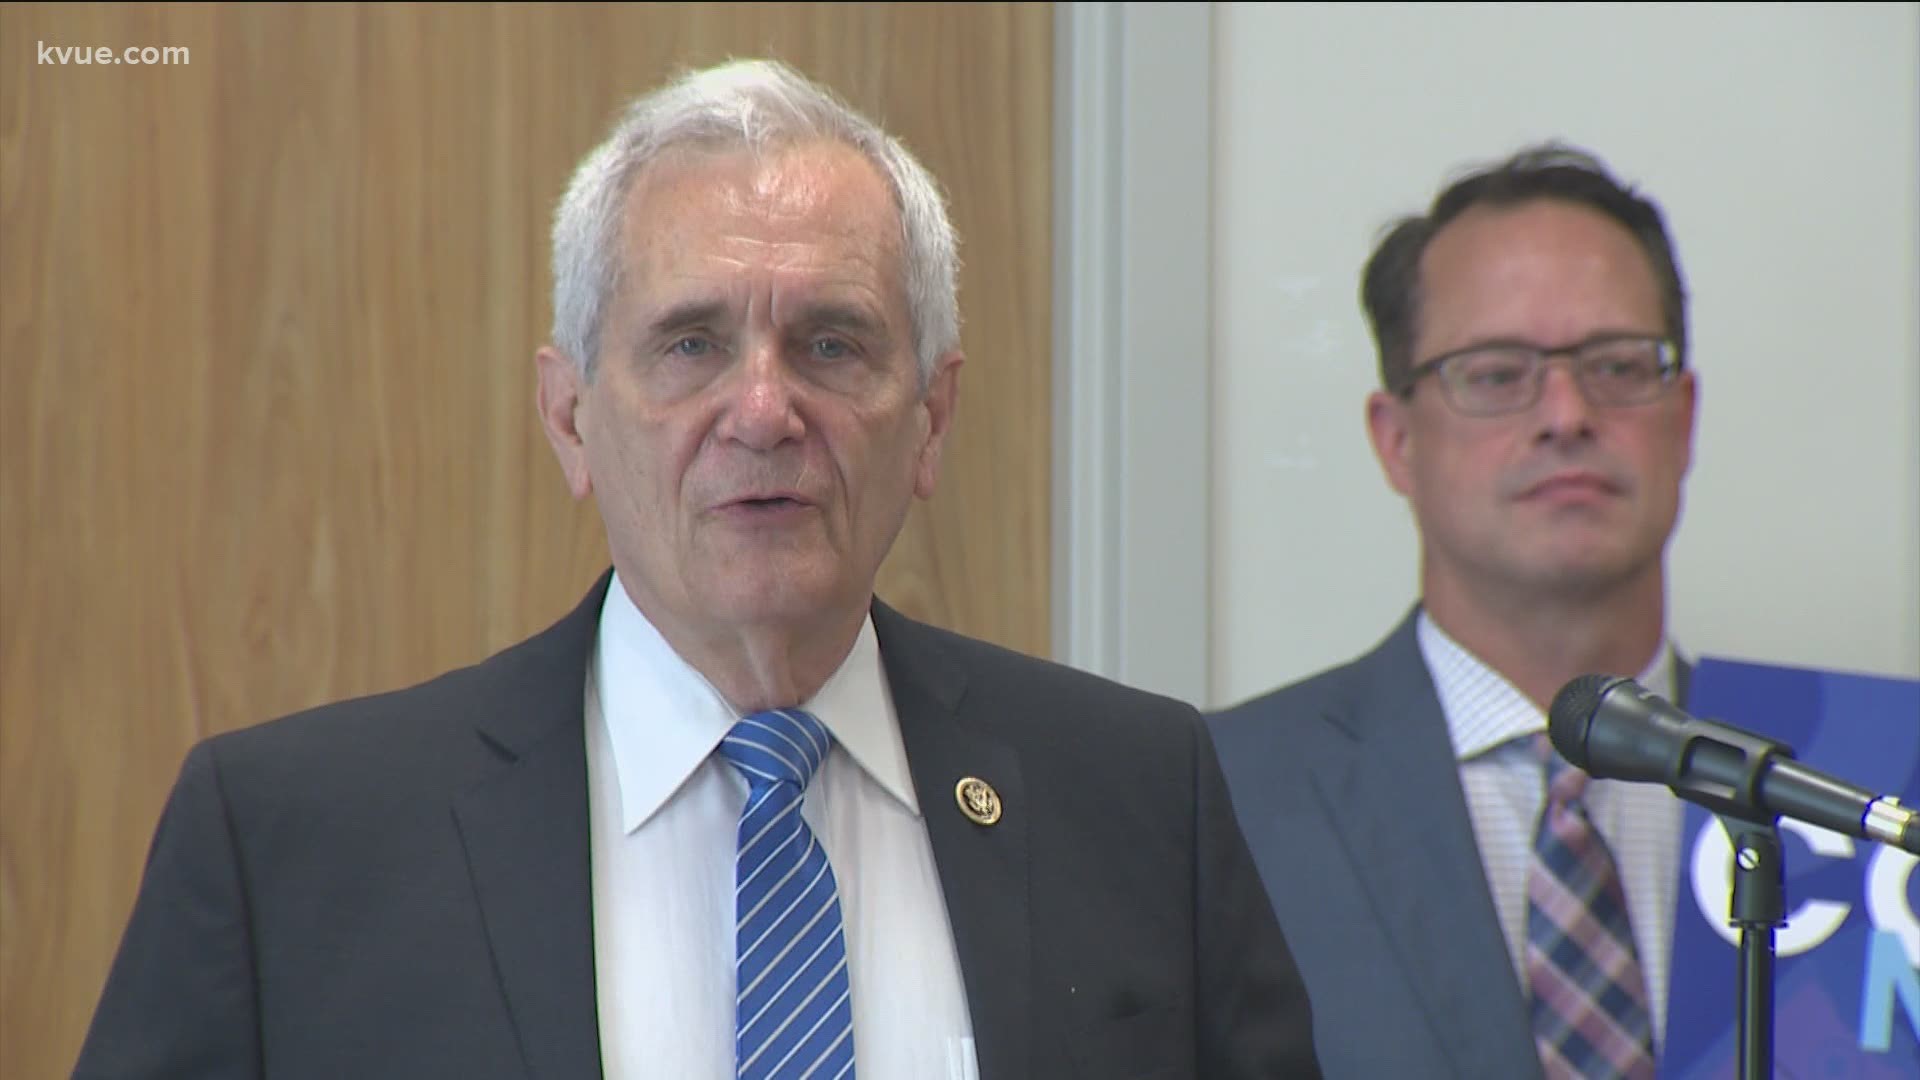 Texas healthcare leaders, including U.S. Rep Lloyd Doggett, are trying to pass the act which would local leaders to expand Medicaid.